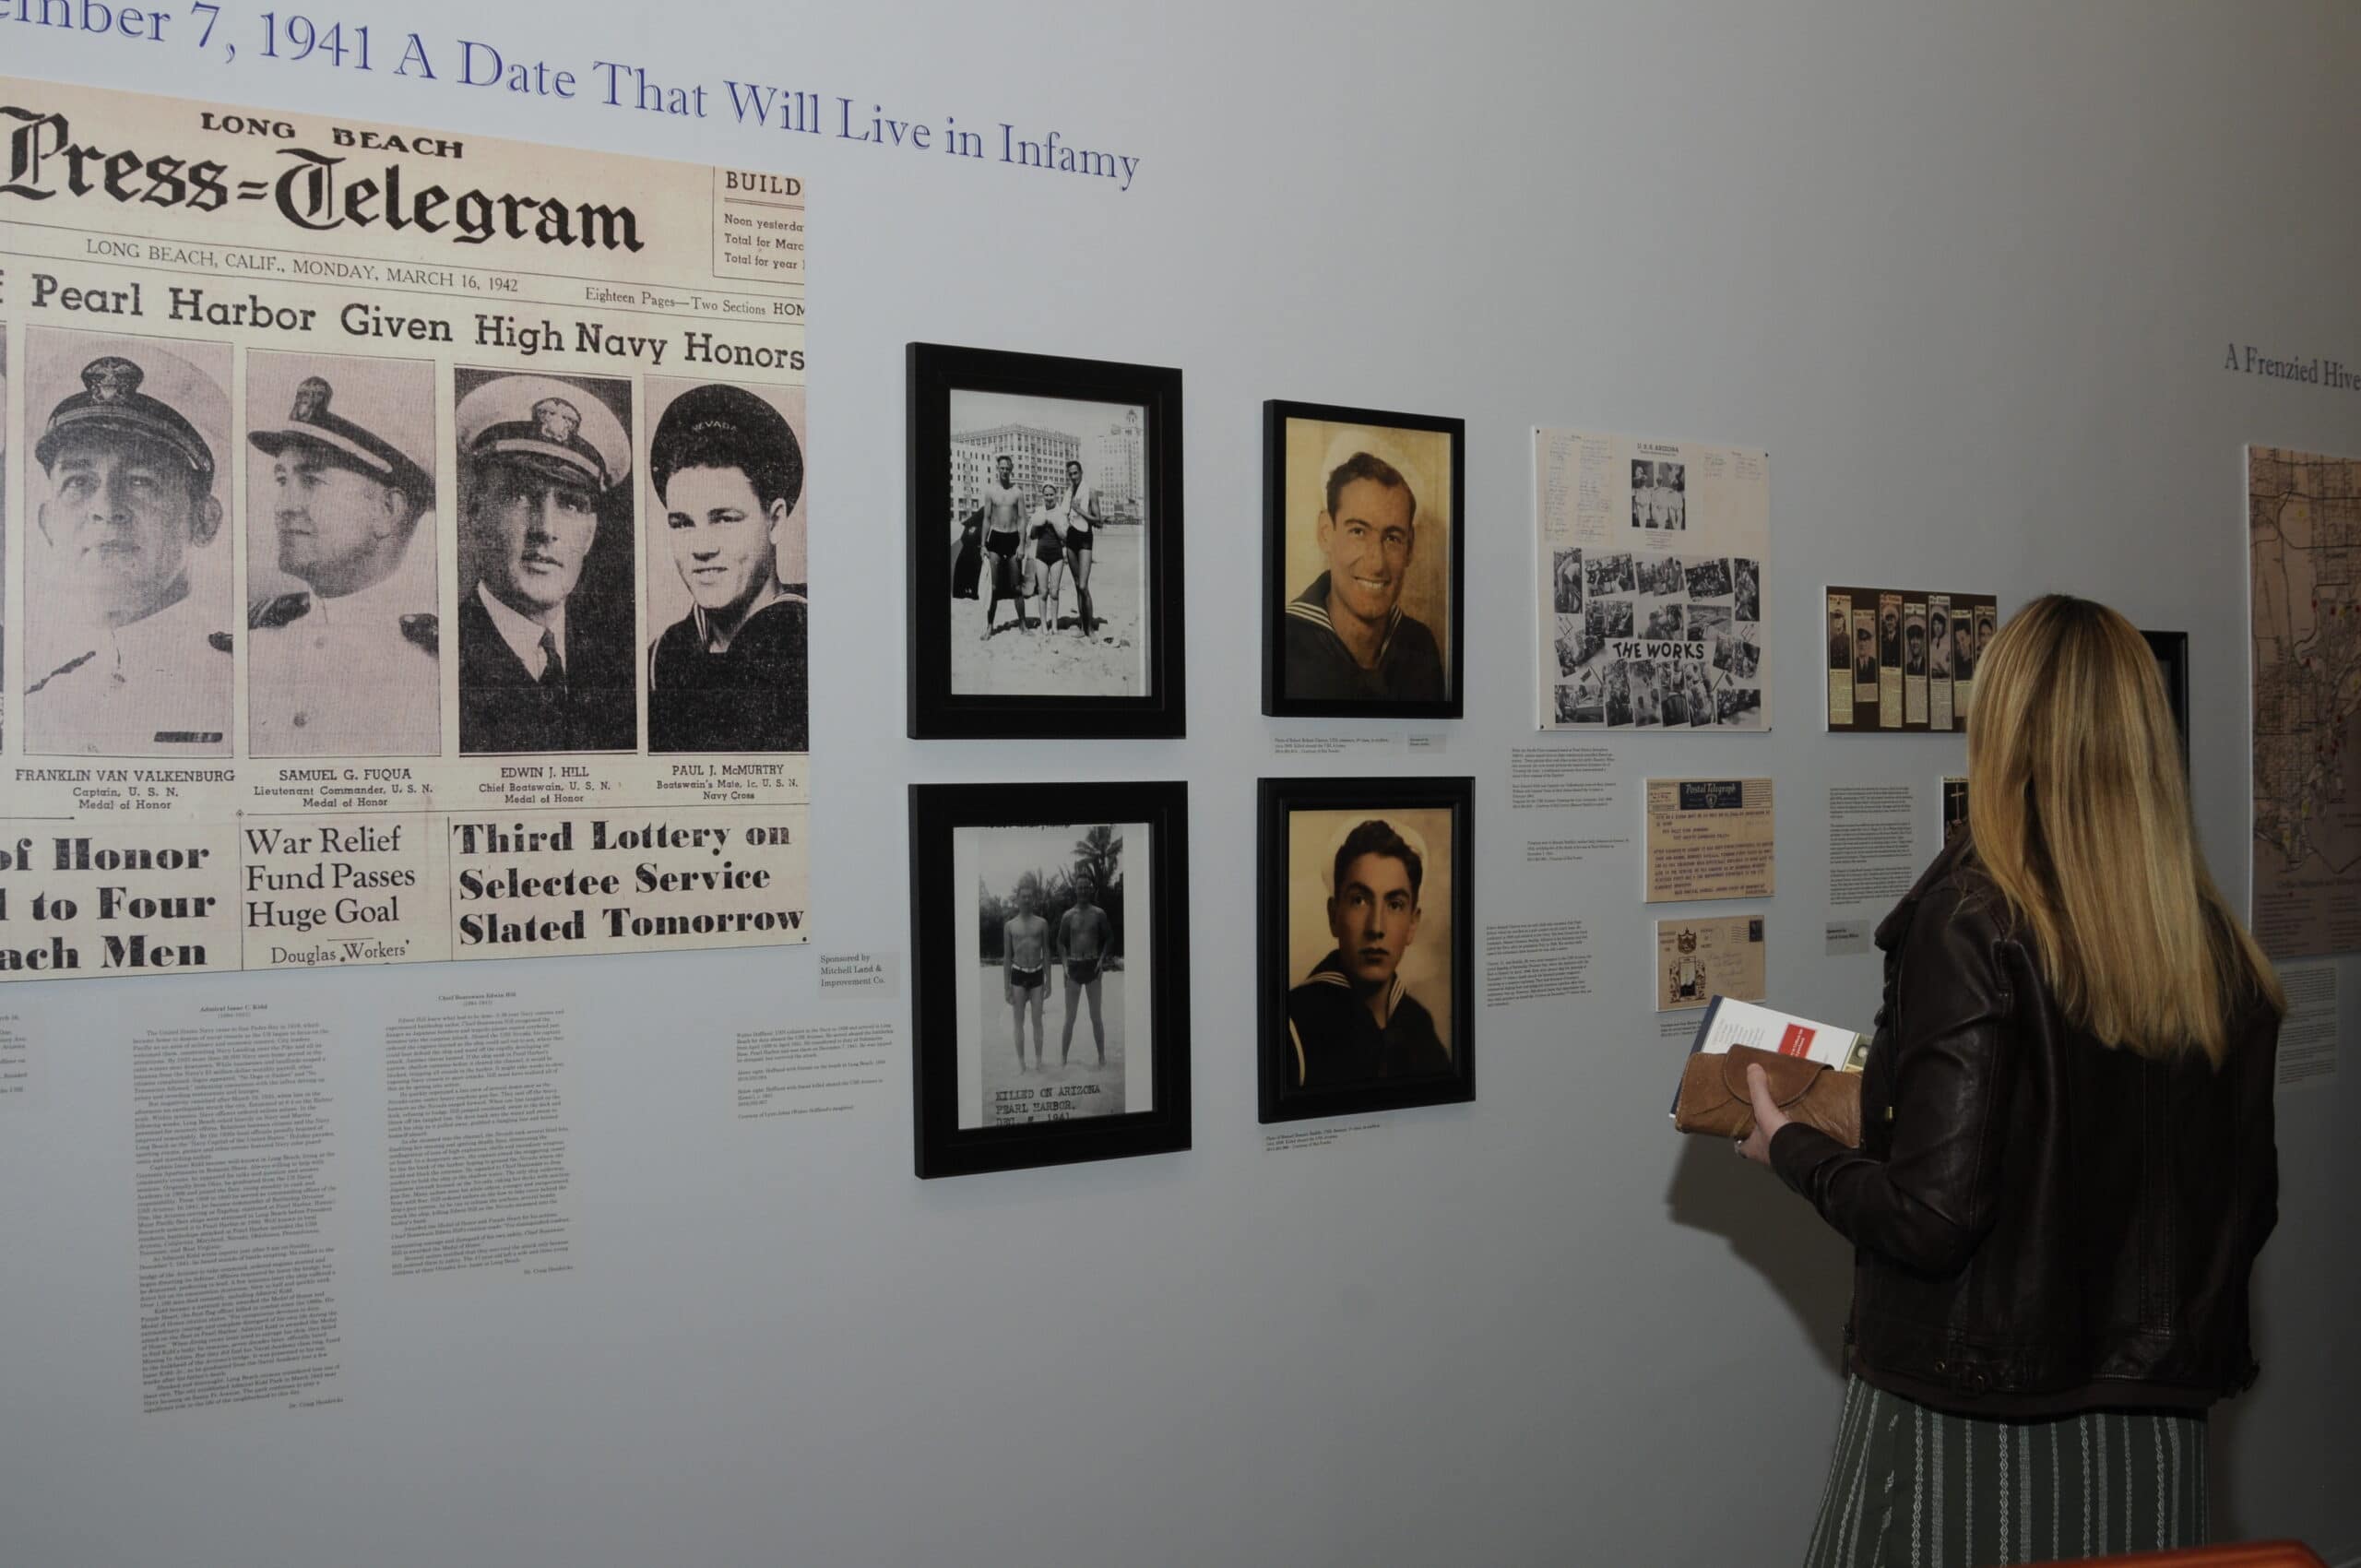 Long beach historical society opening reception Pearl harbor vintage newspapers and photos